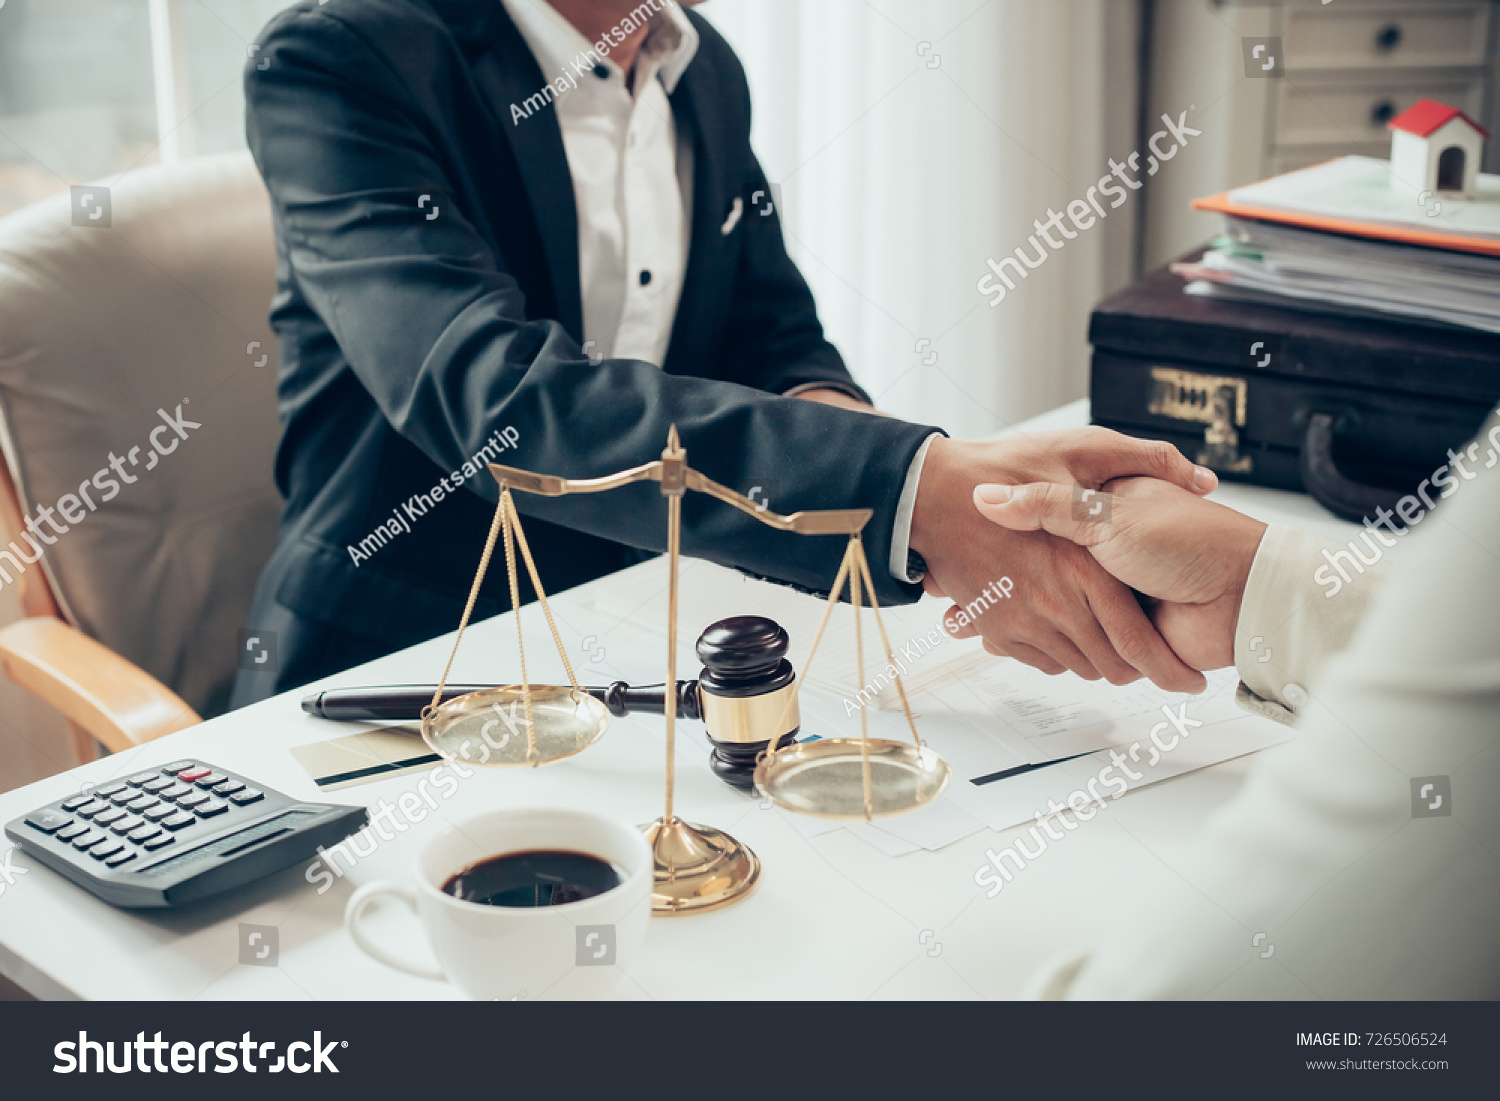 Businessman shaking hands to seal a deal with his partner lawyers or attorneys discussing a contract agreement #726506524